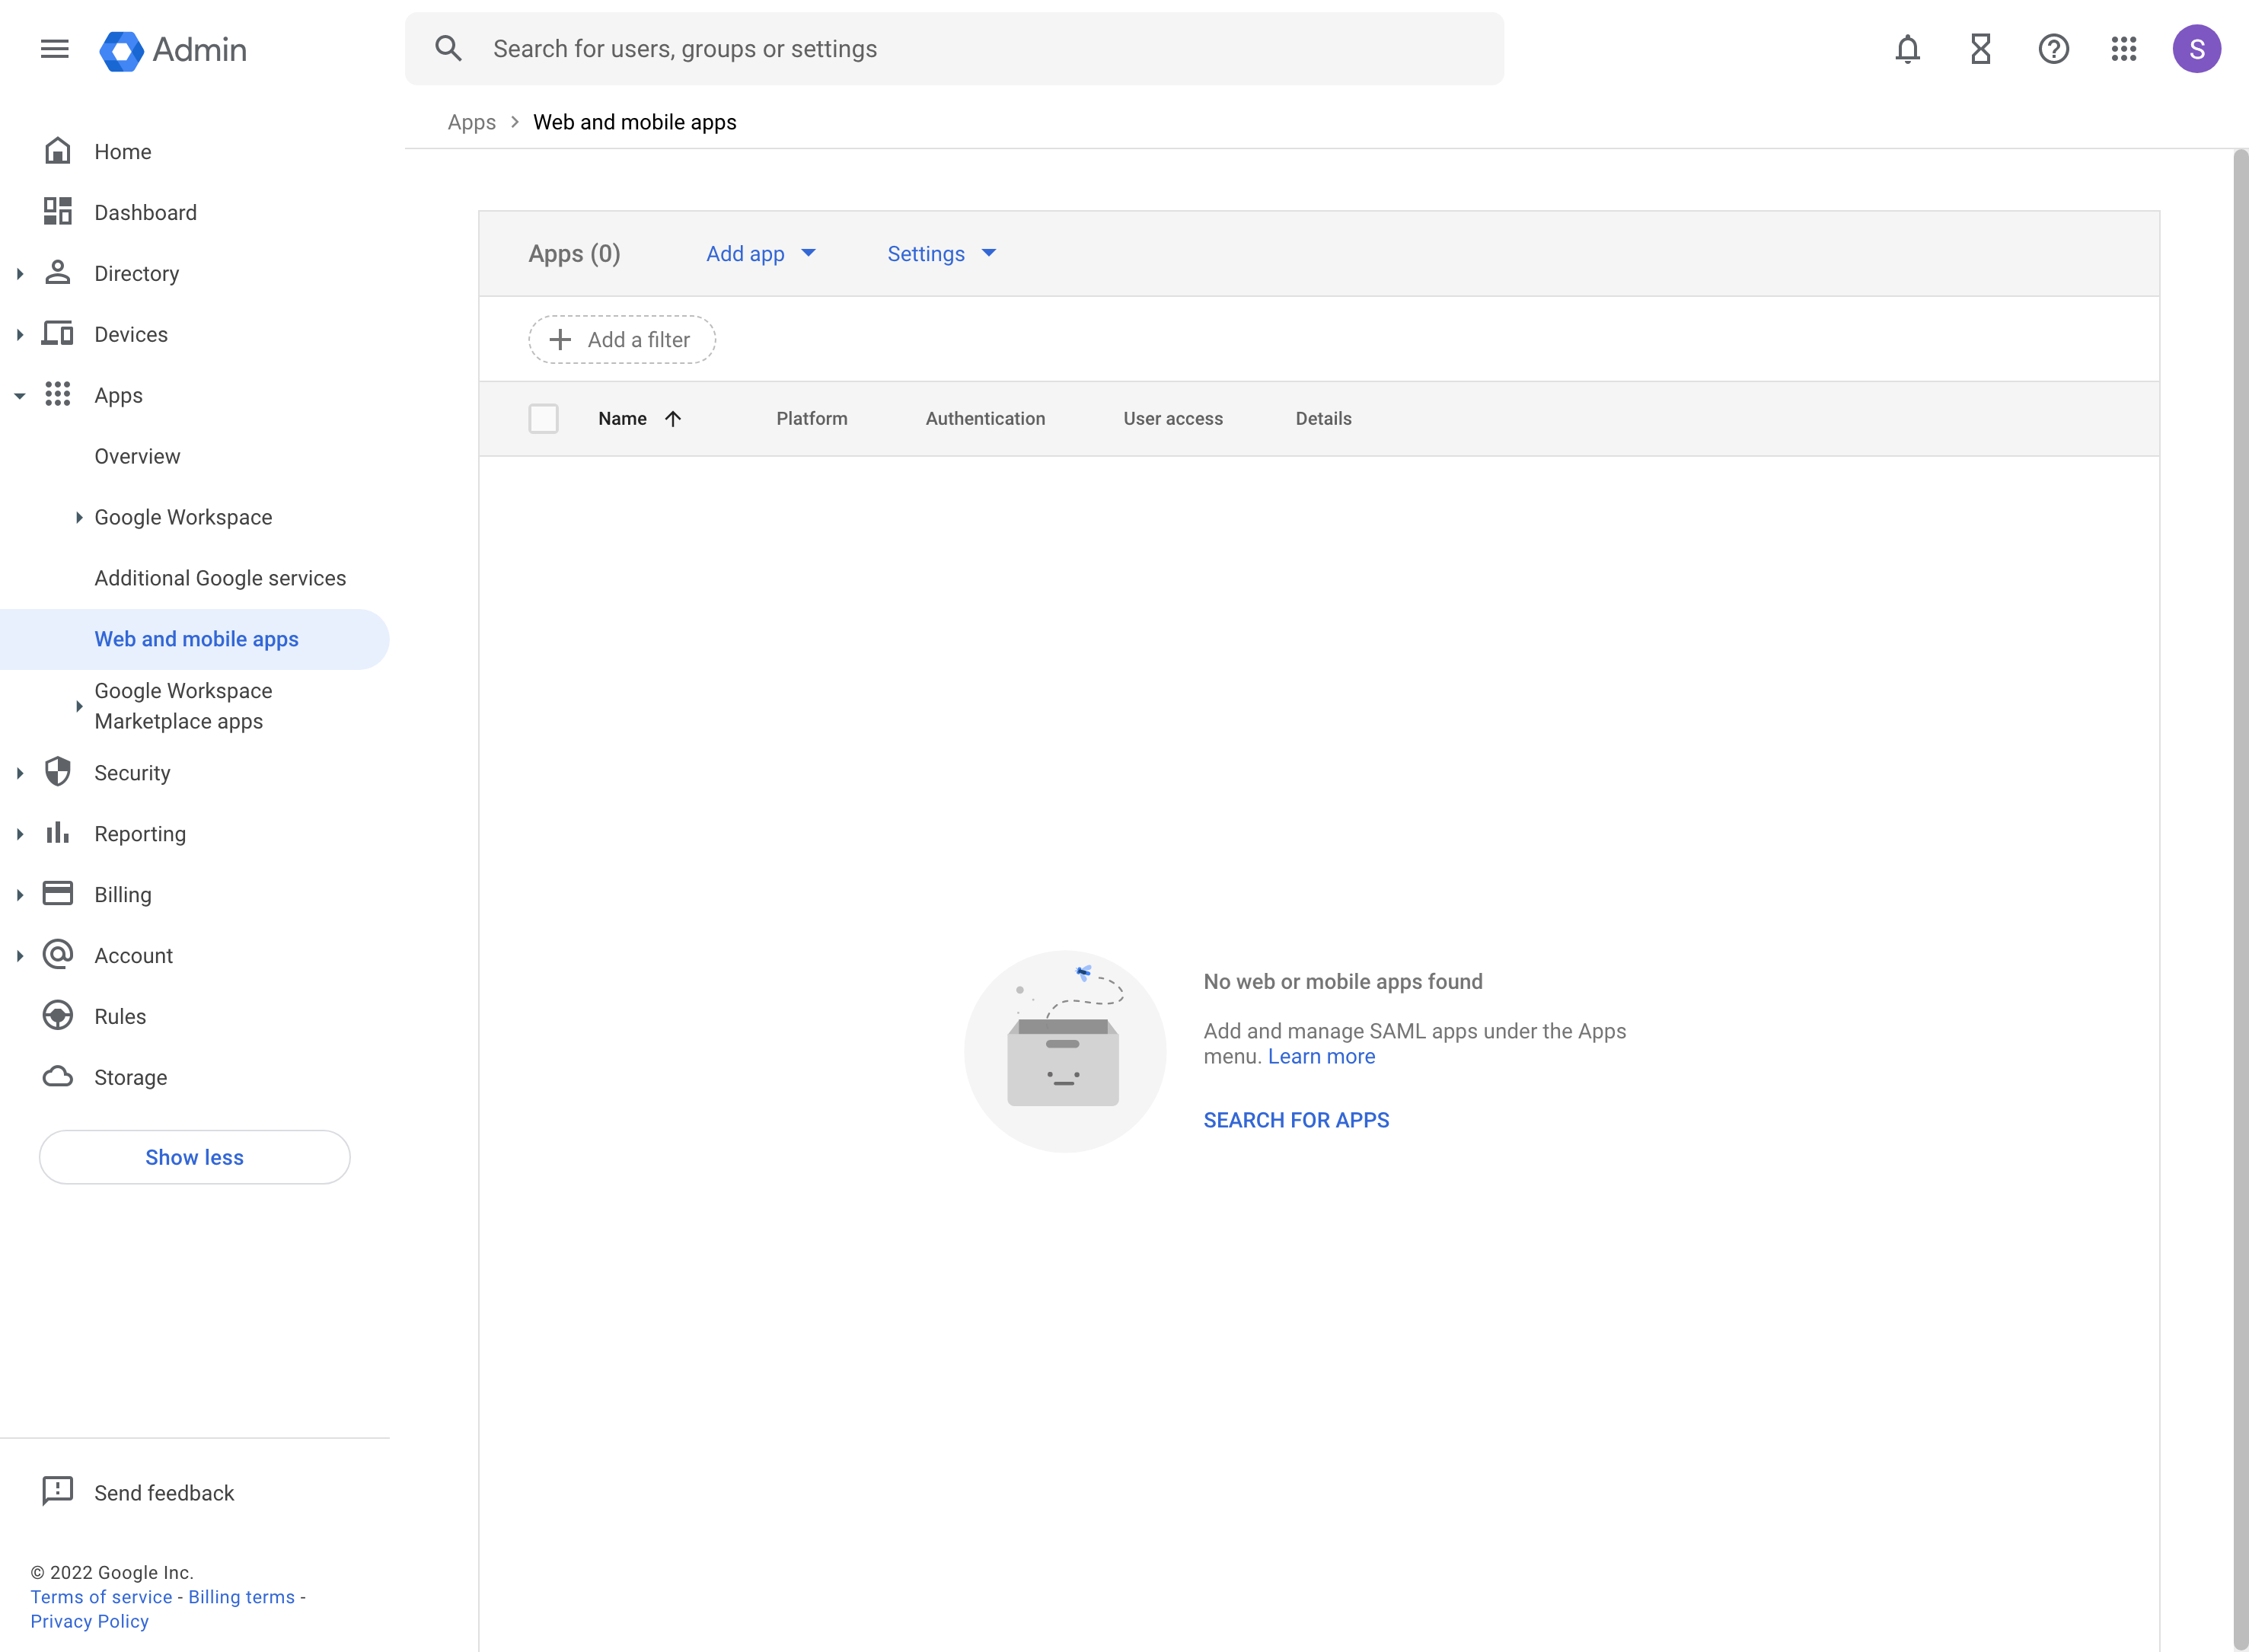 Google Workspace: Web and mobile apps admin console